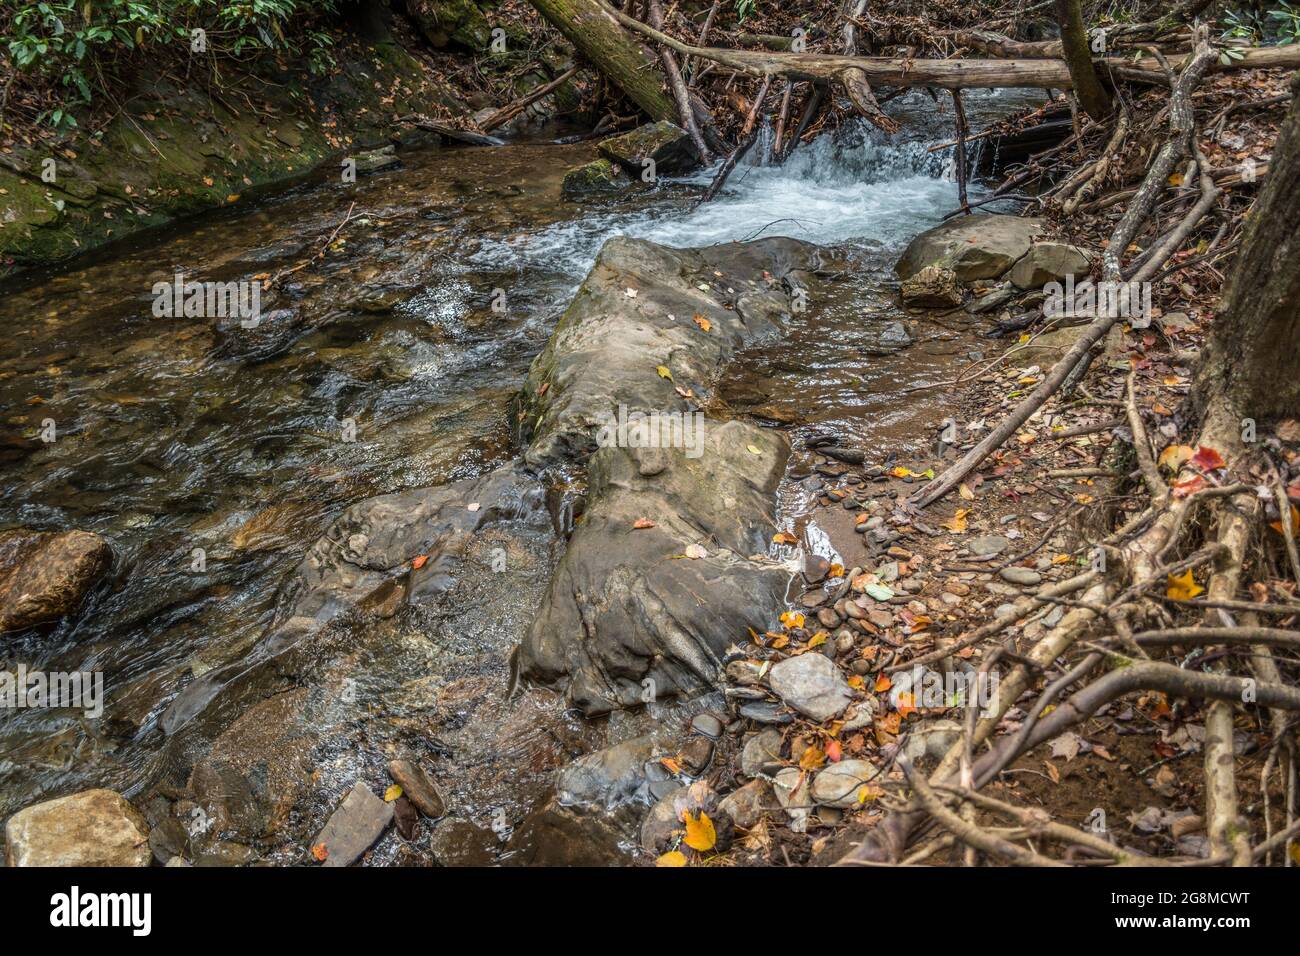 Standing on a boulder in the flowing water of the stream cascading over rocks and branches with small rocks and fallen leaves on the shoreline in autu Stock Photo